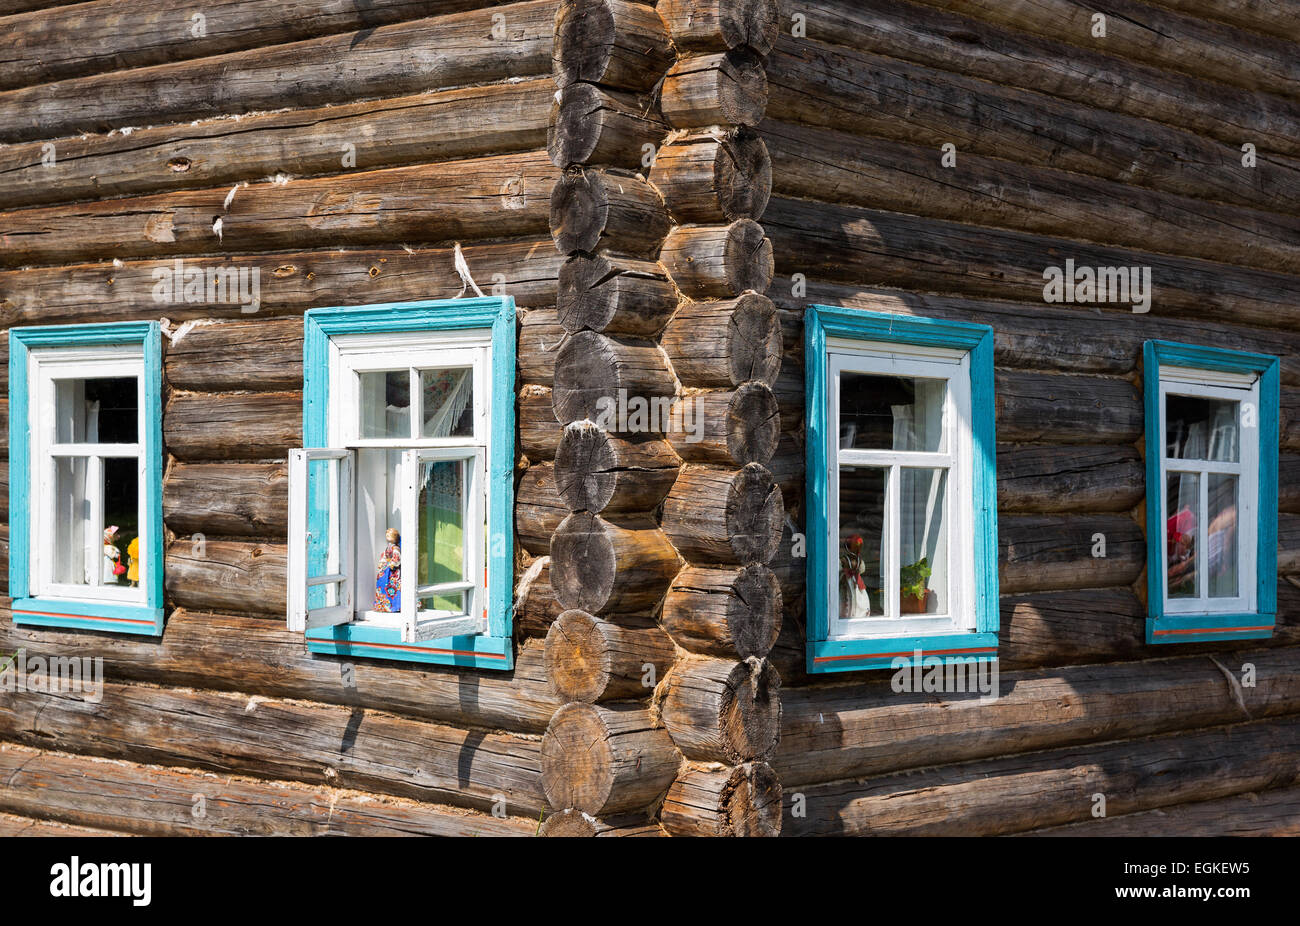 Russia, Leningrad region, Mandrogi, a craft village on the Svir river bank,  colored windows of an old wooden house Stock Photo